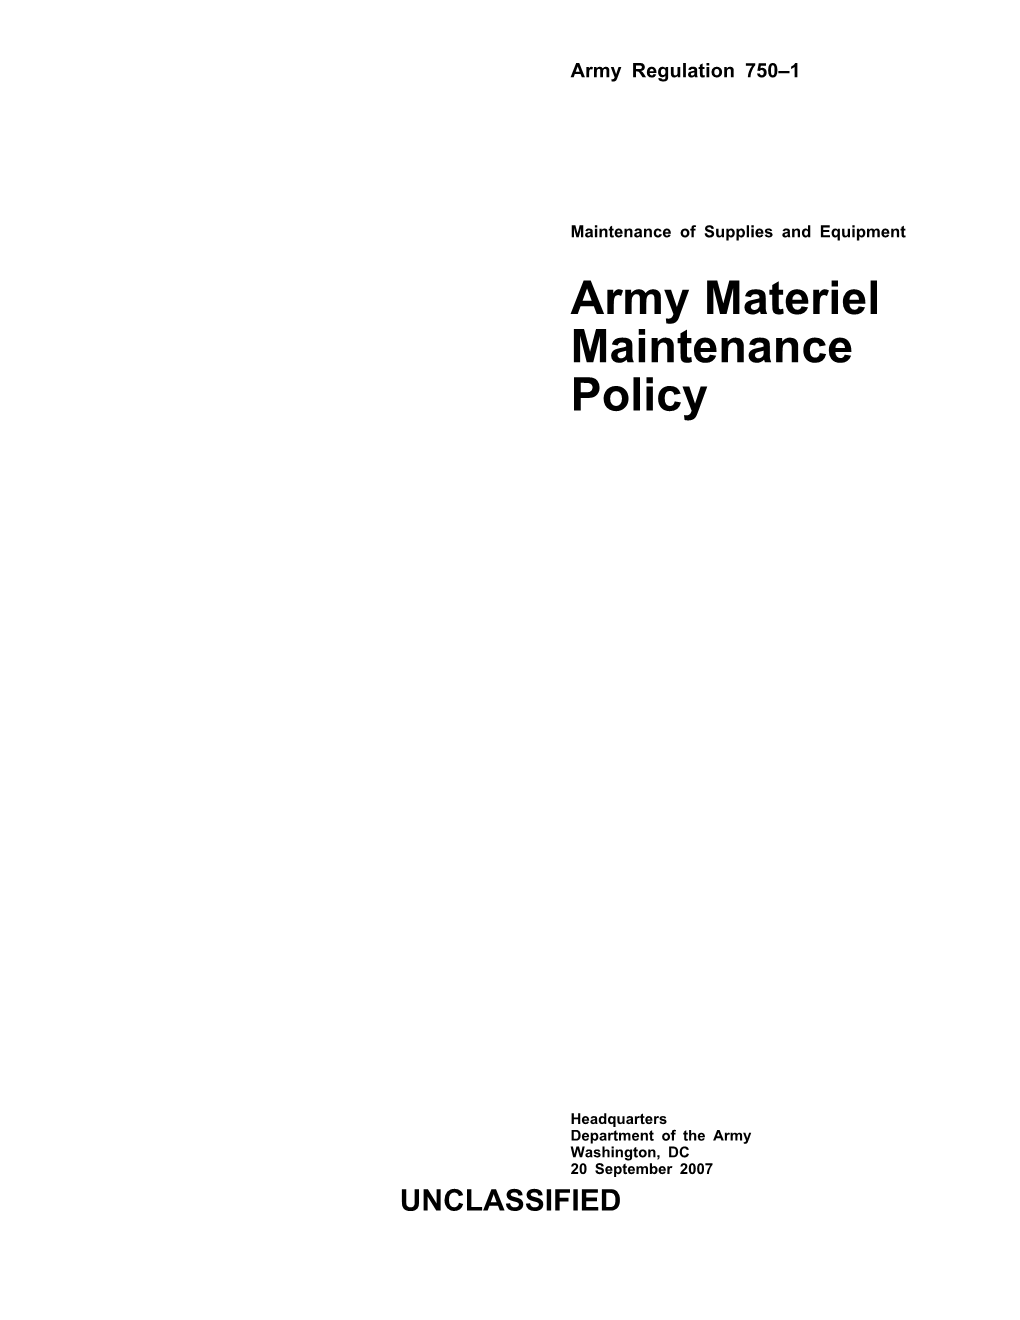 Army Materiel Maintenance Policy